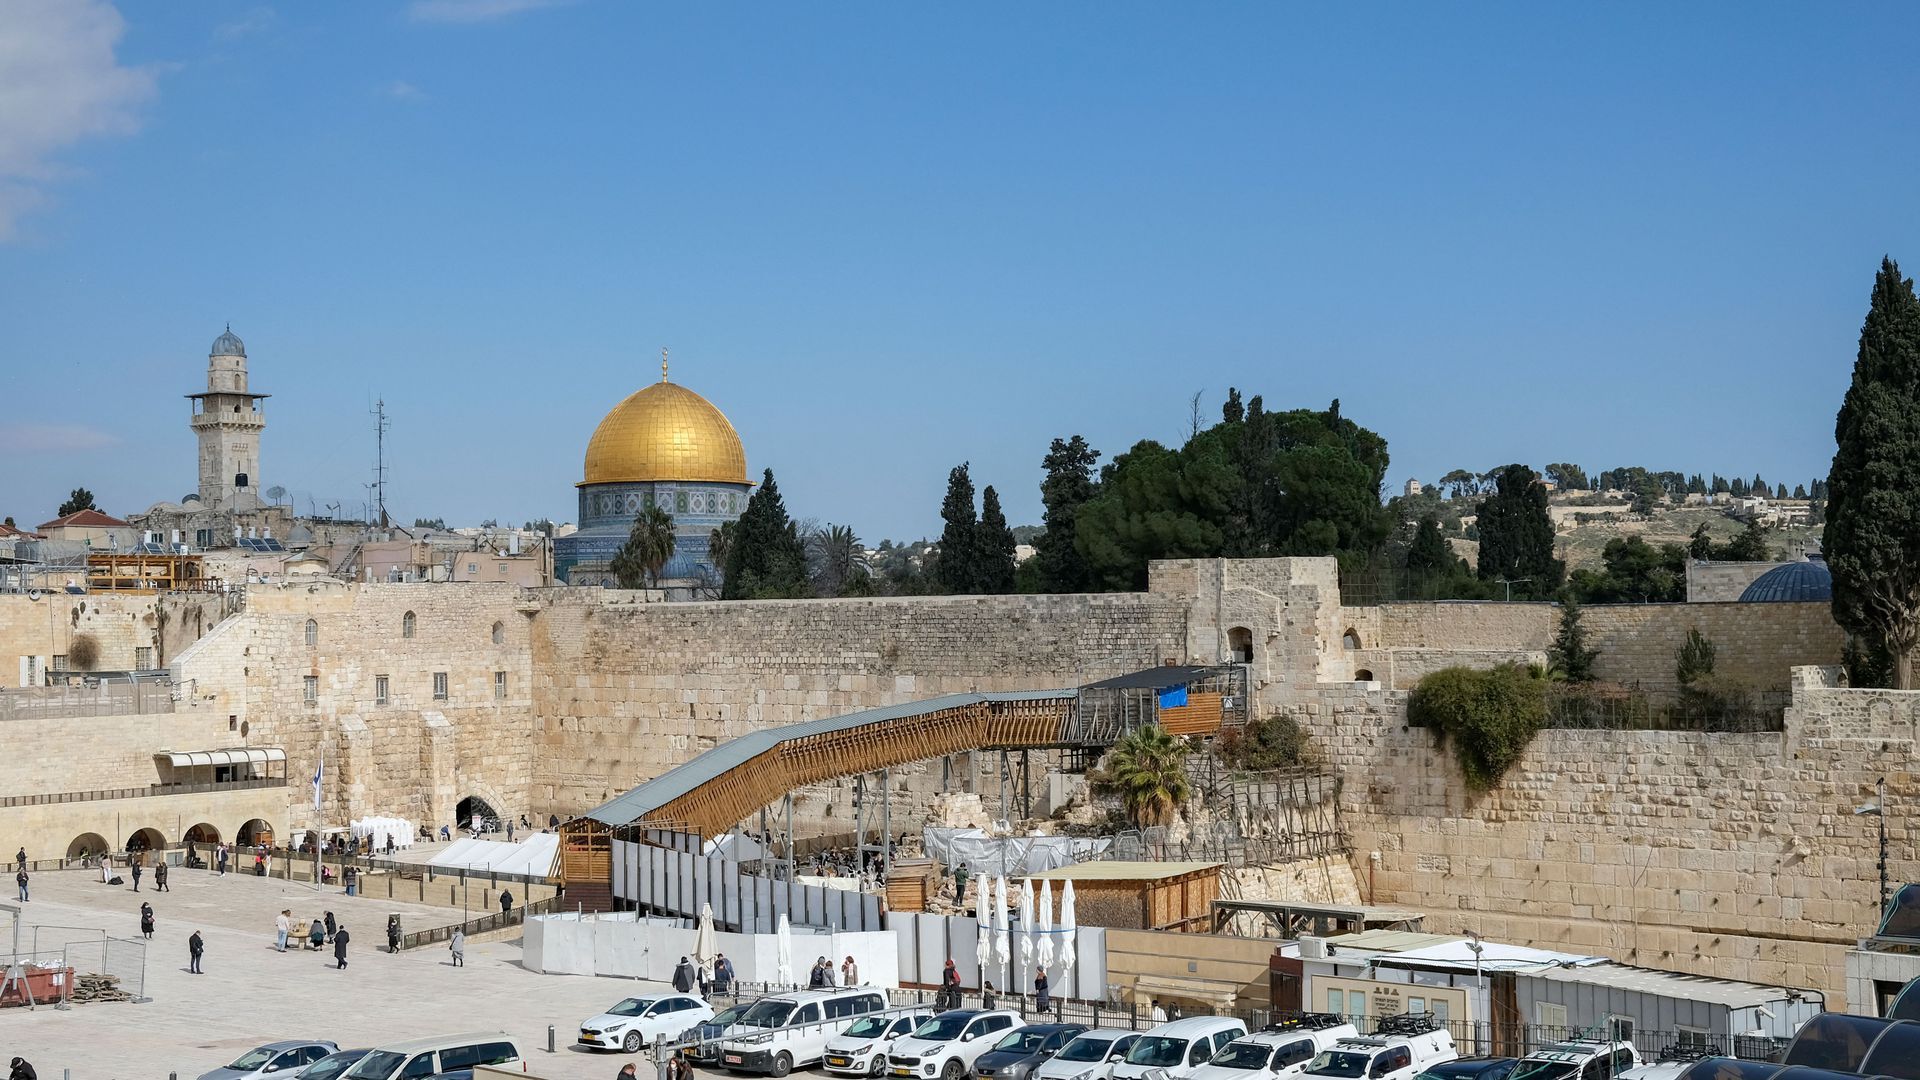 . works to maintain calm in Jerusalem as holidays near